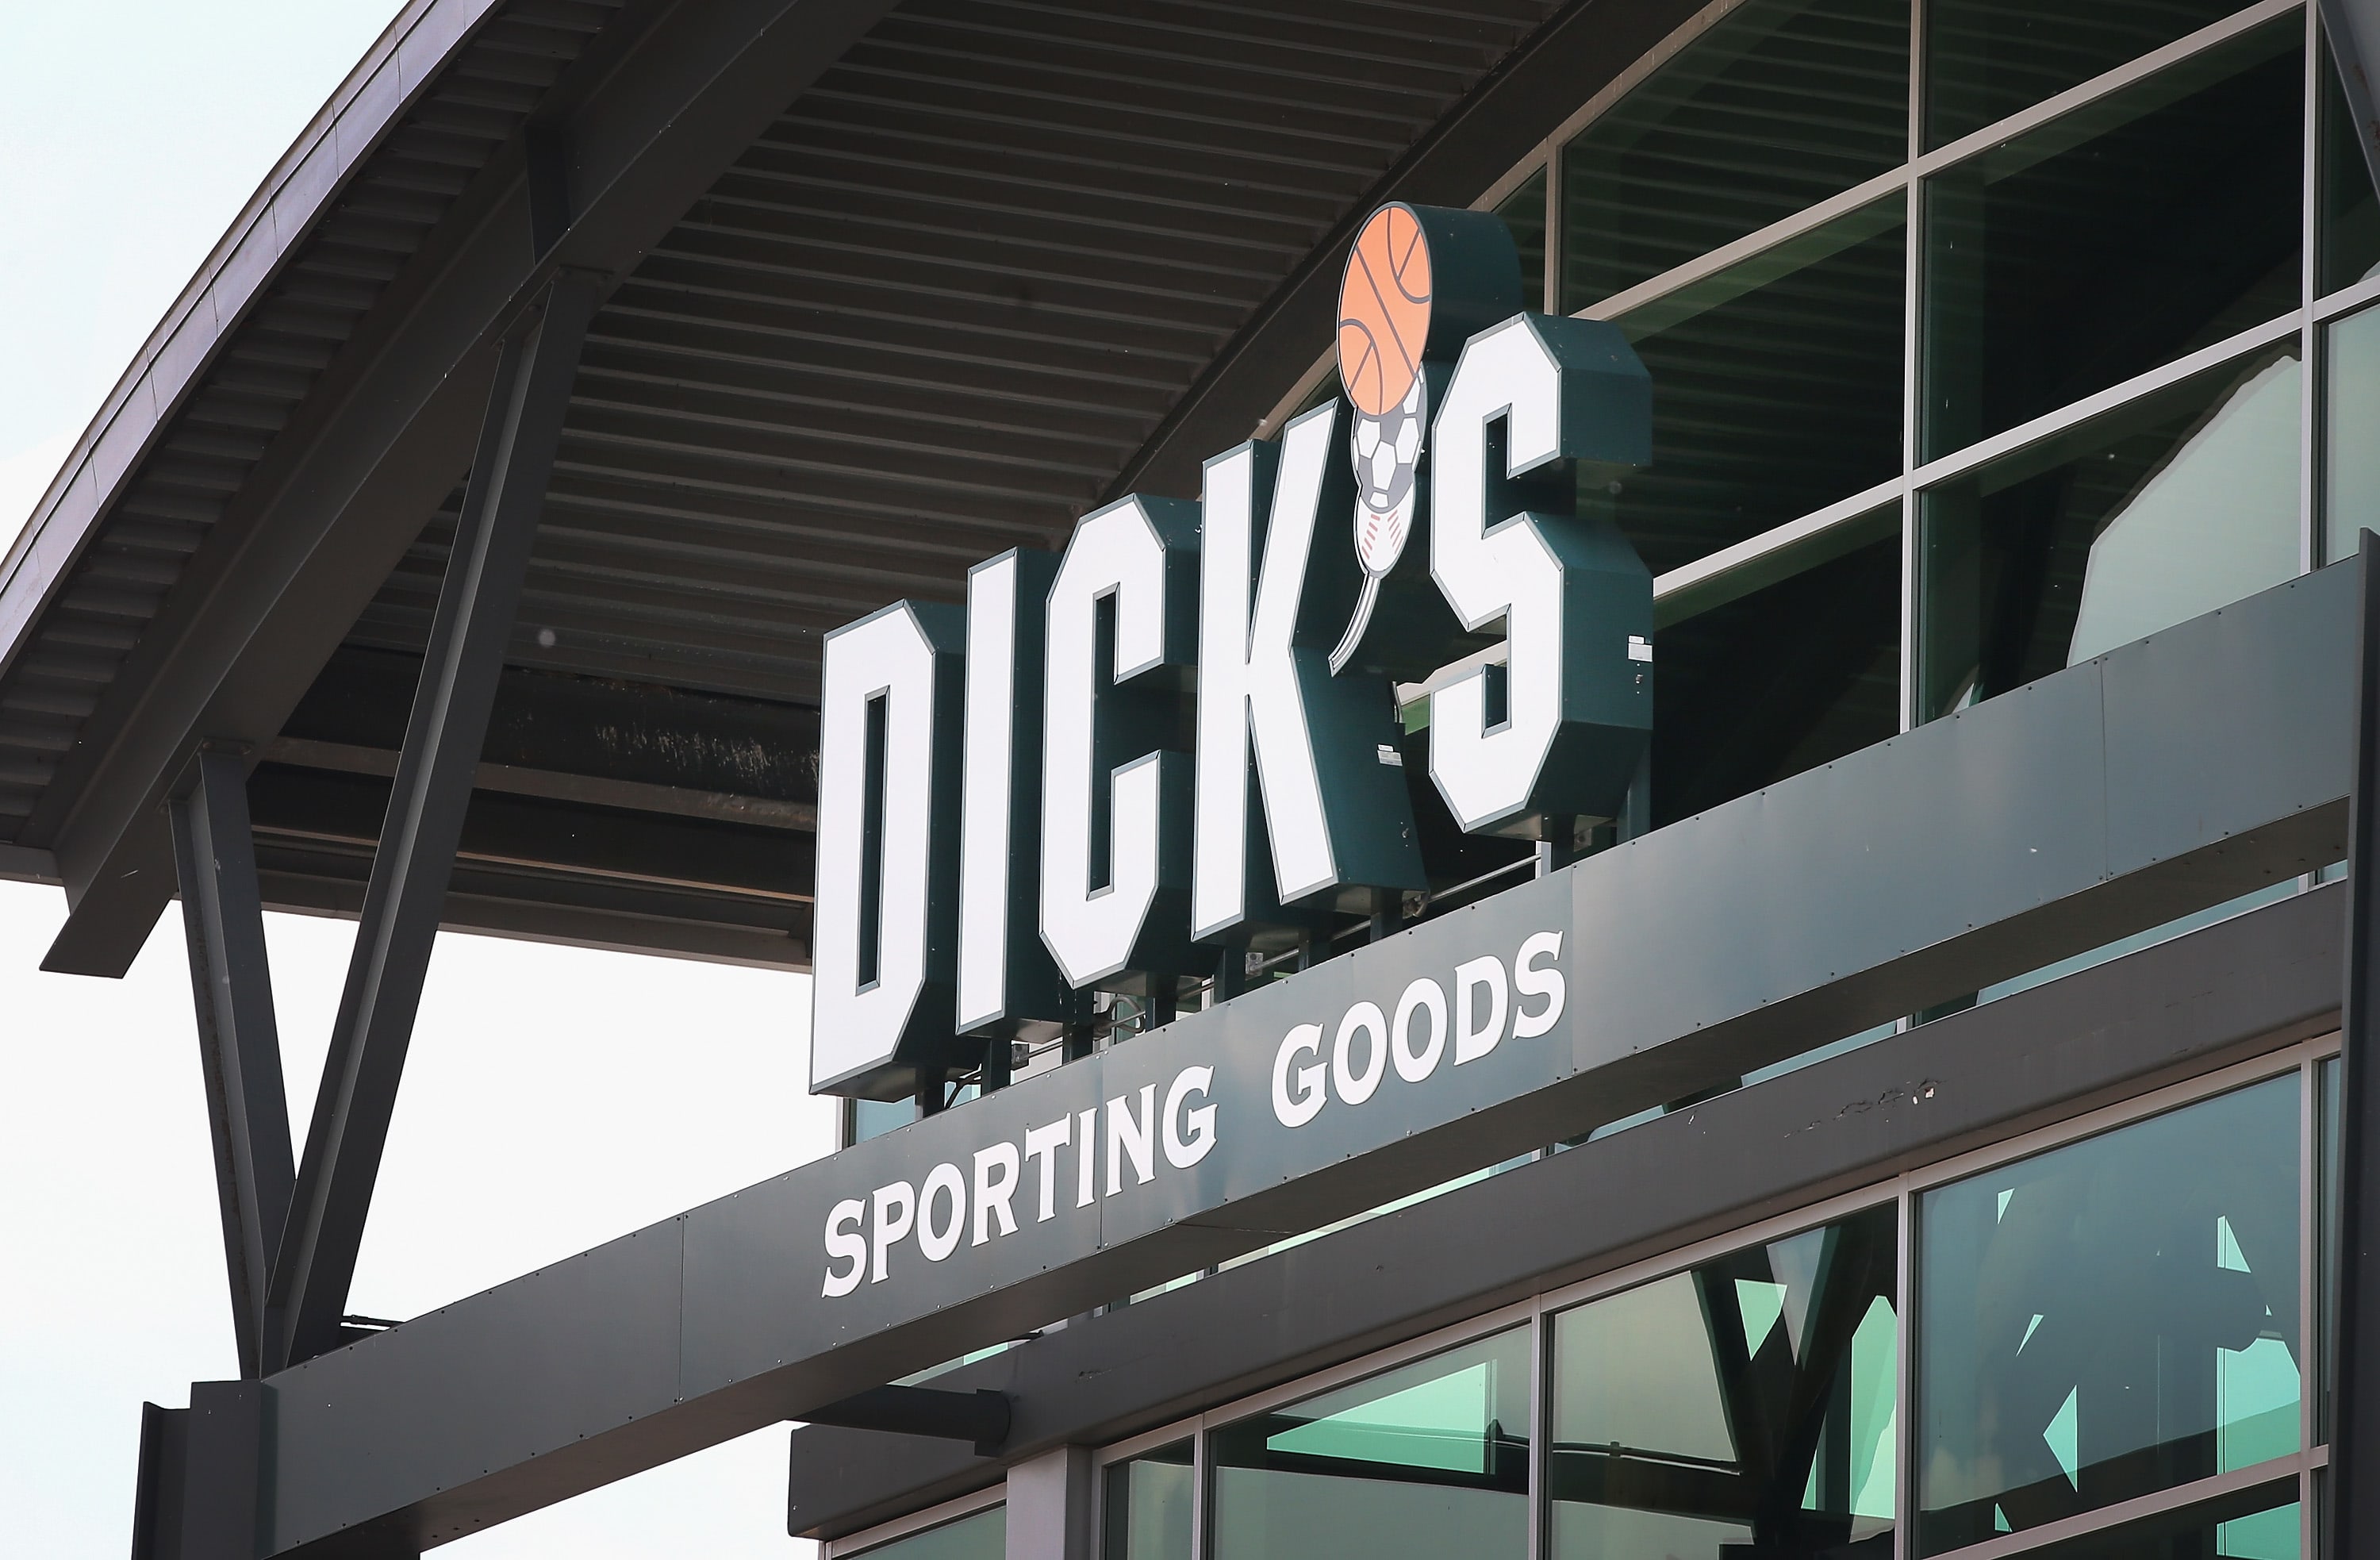 Dick’s Sporting Goods is launching its own line of men’s athletics